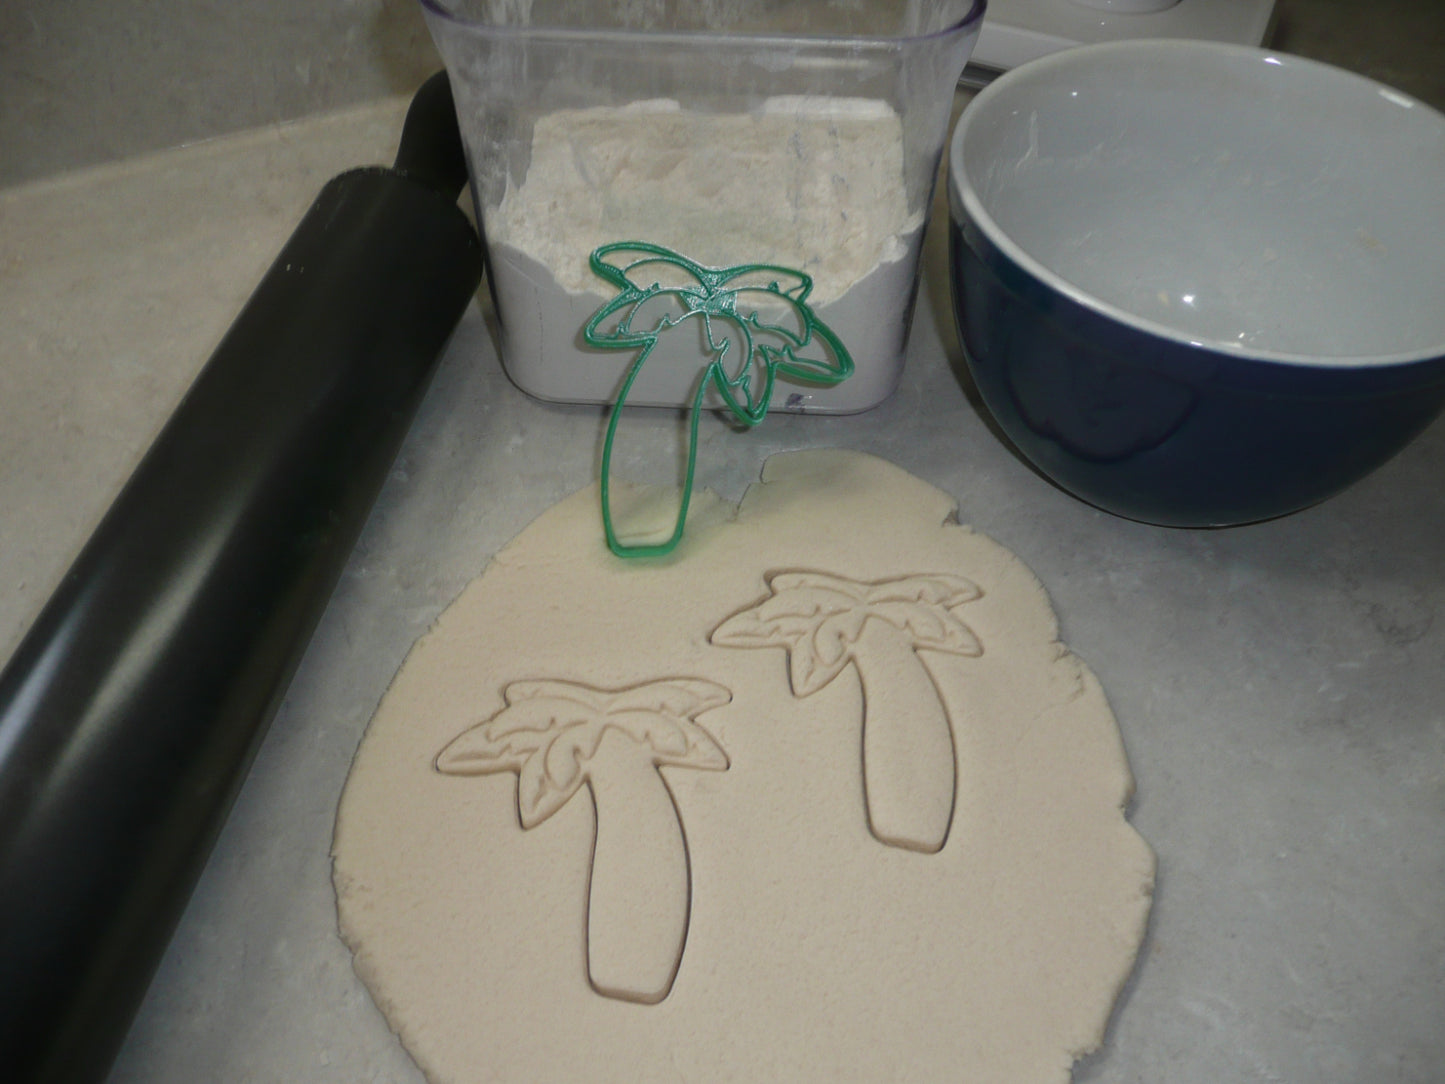 Palm Tree Leaning With Detailed Leaves Tropical Cookie Cutter Made In USA PR4967